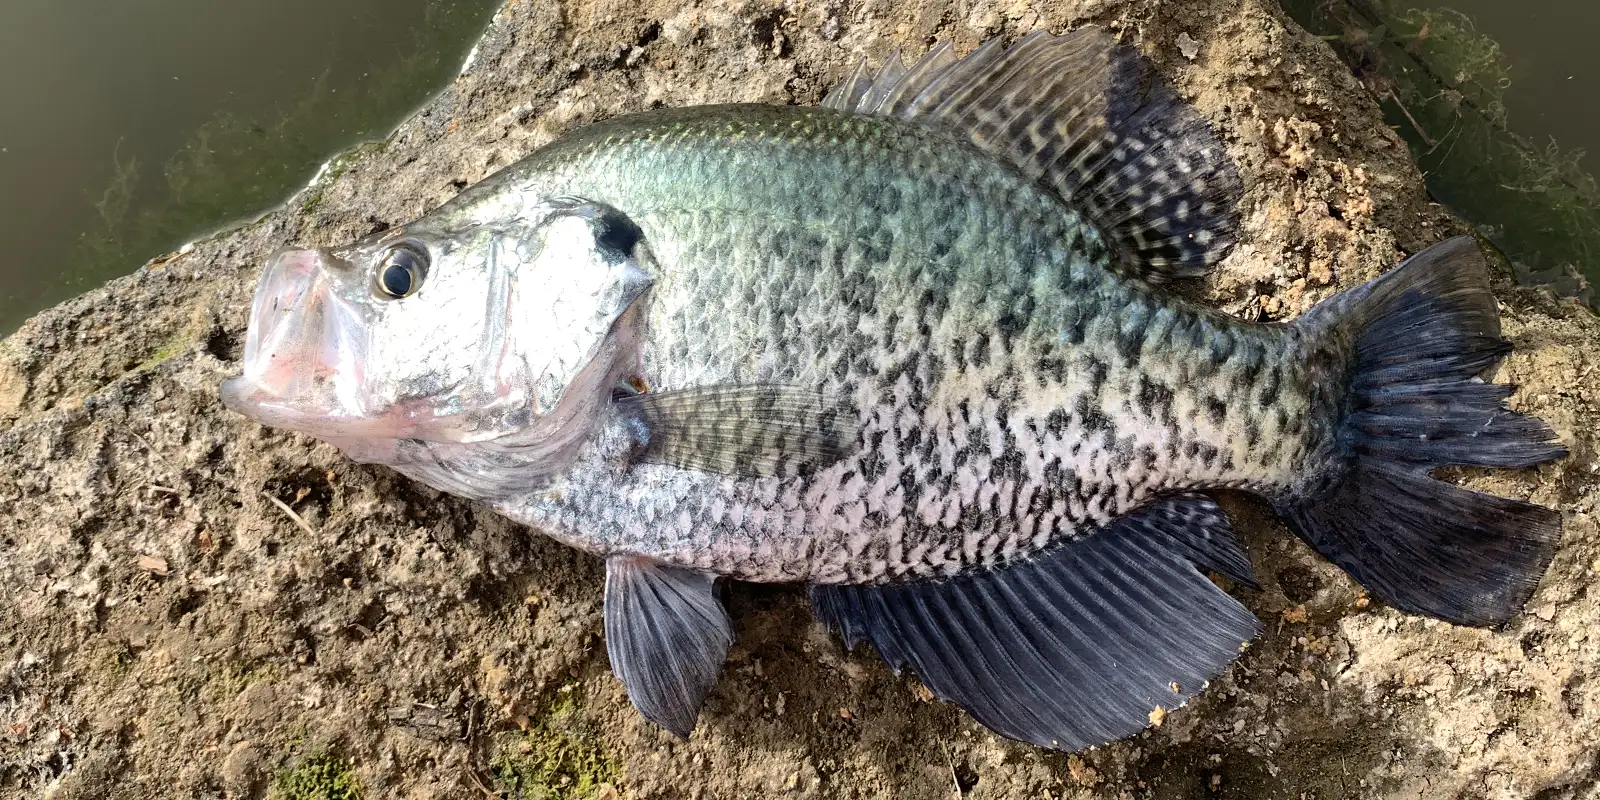 https://lakehub.com/wp-content/uploads/2023/04/how-to-attract-crappie.webp